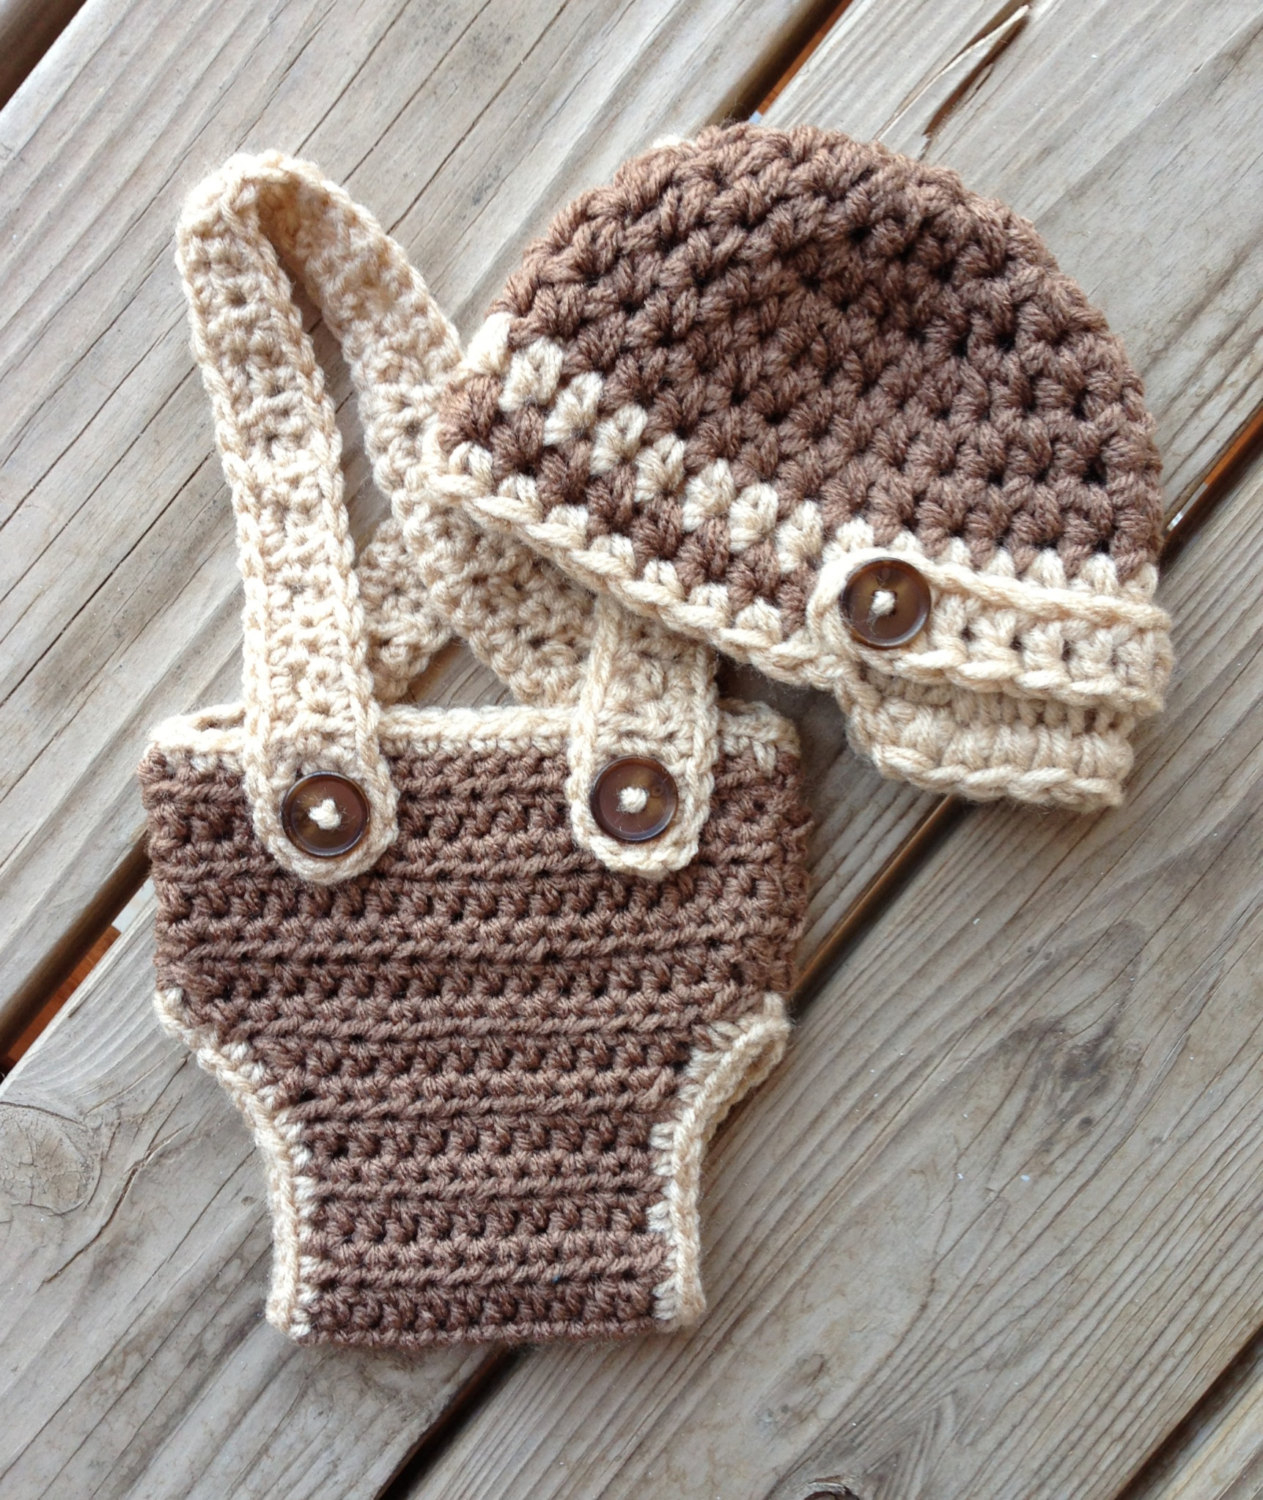 Crochet Baby Hat And Diaper Cover Pattern Crochet Ba Hat And Diaper Cover Pattern Pakbit For